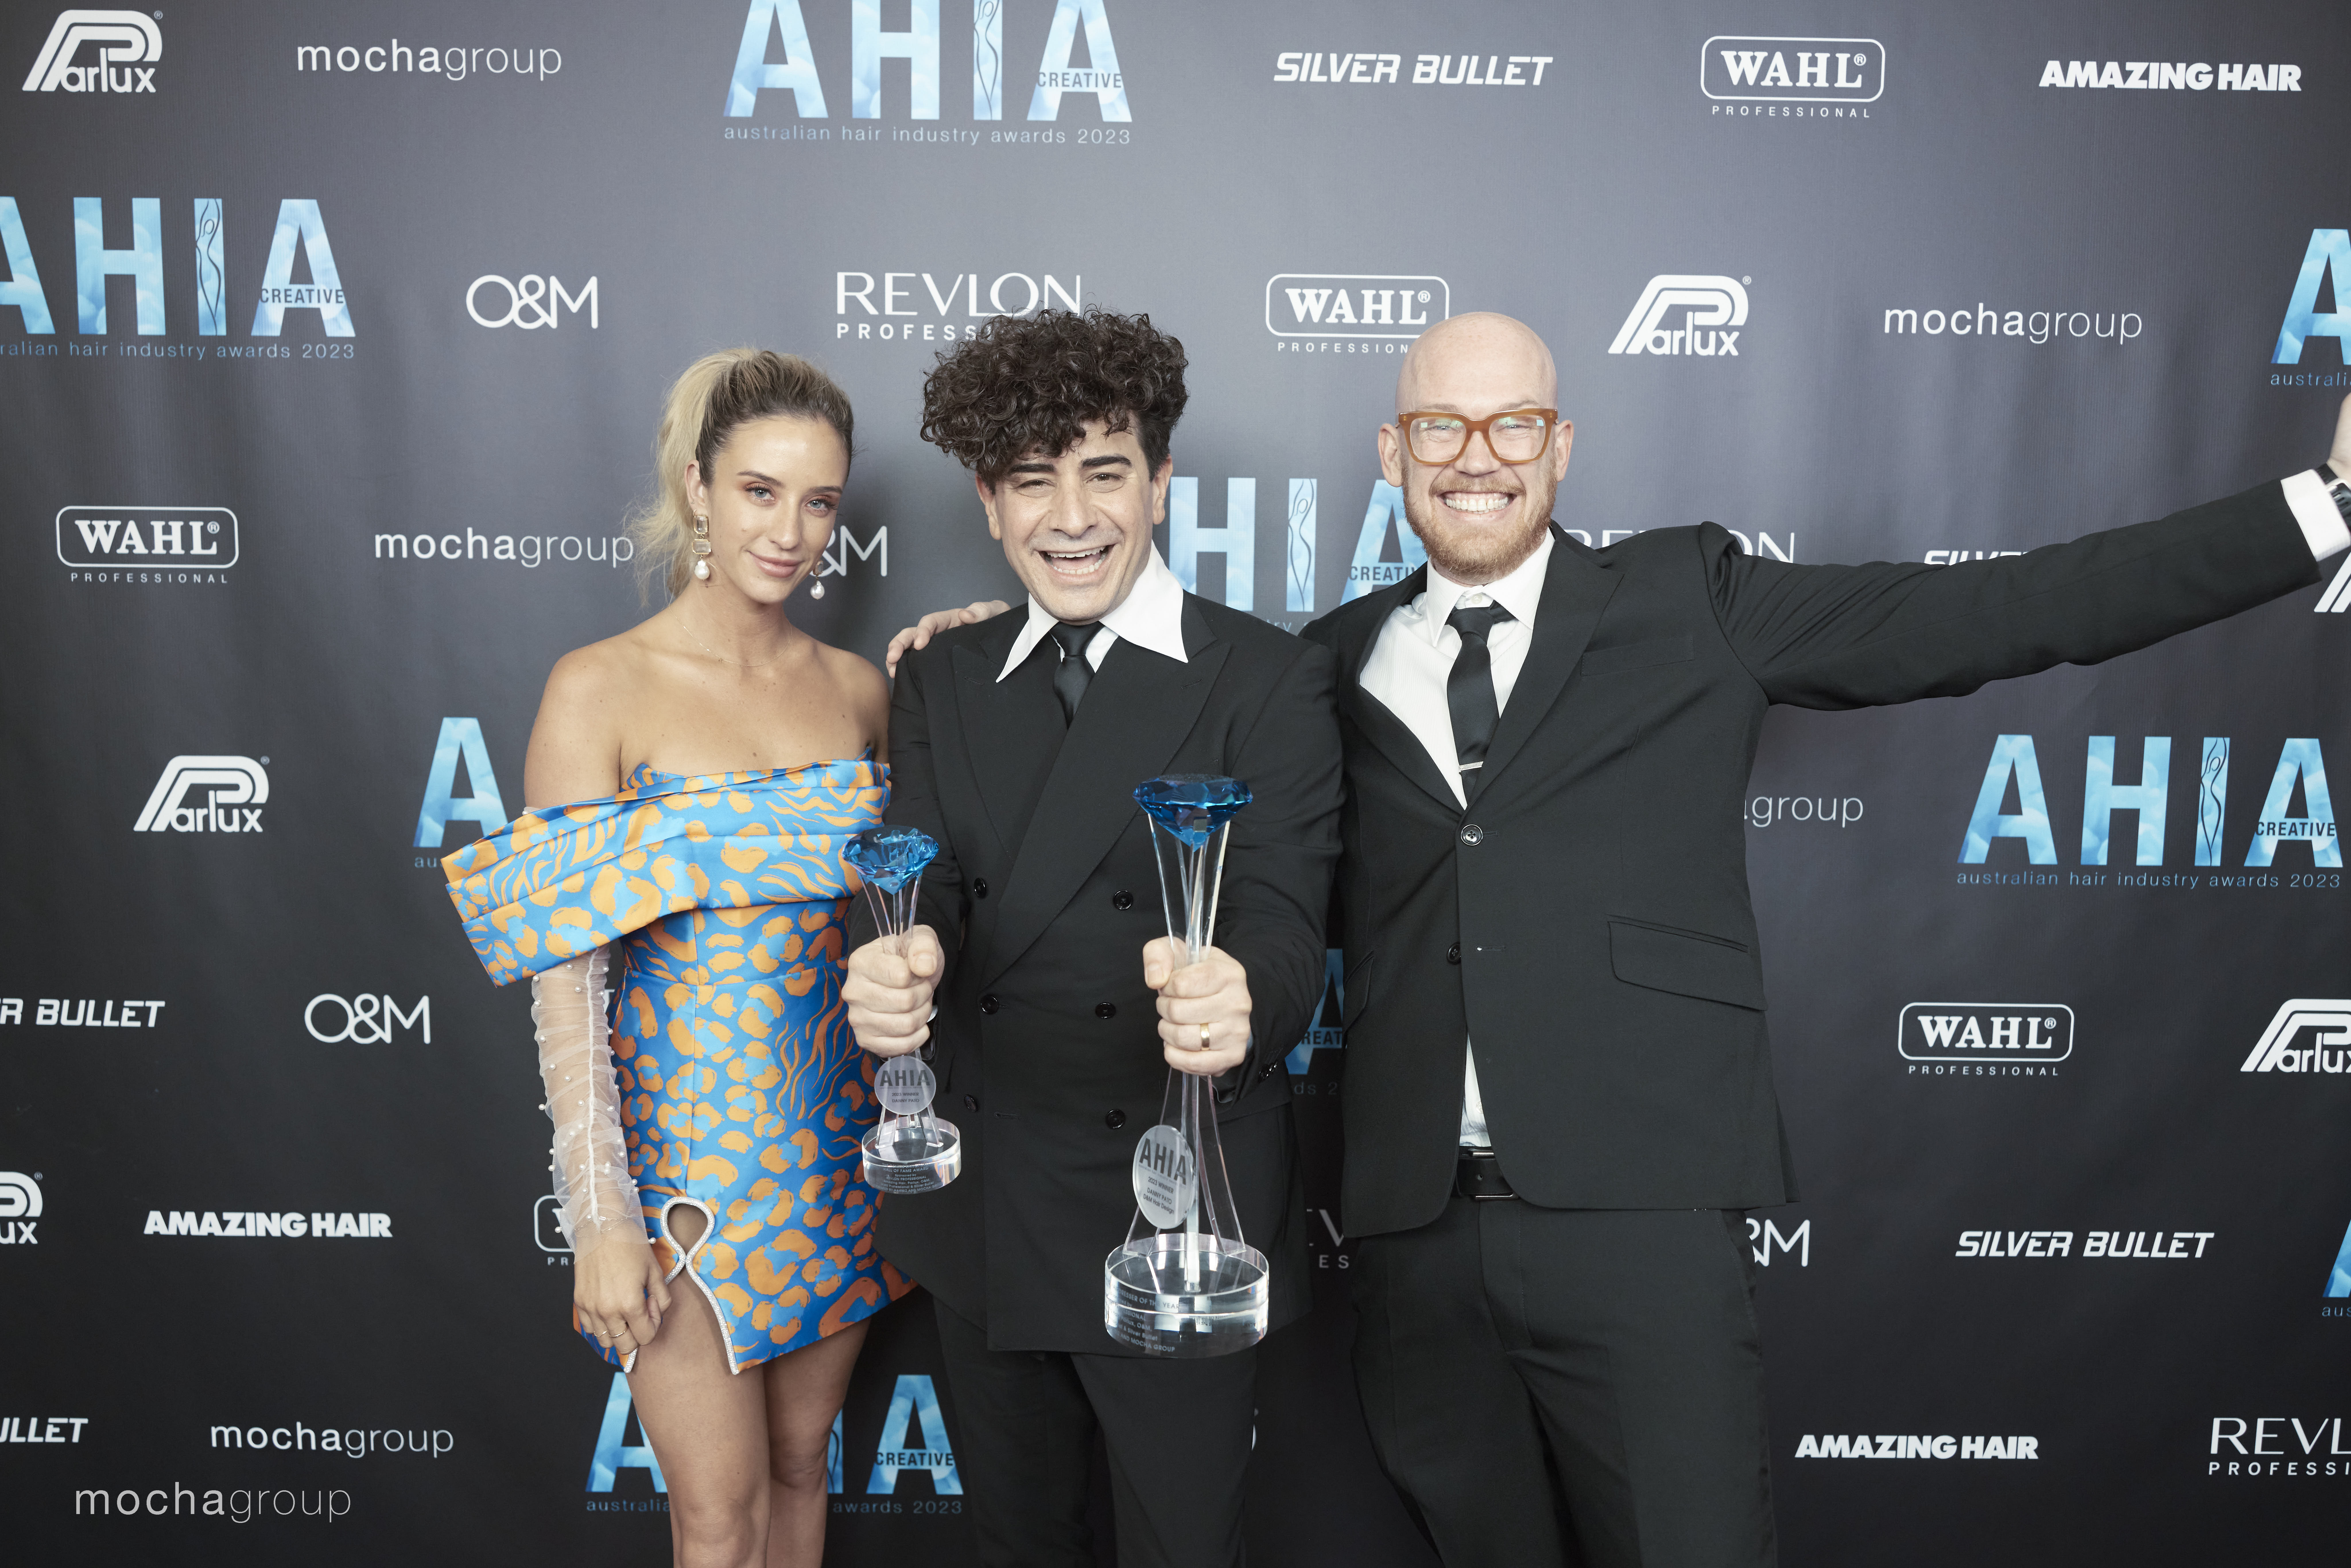 The AHIA Creative Awards announces key changes for New Zealand